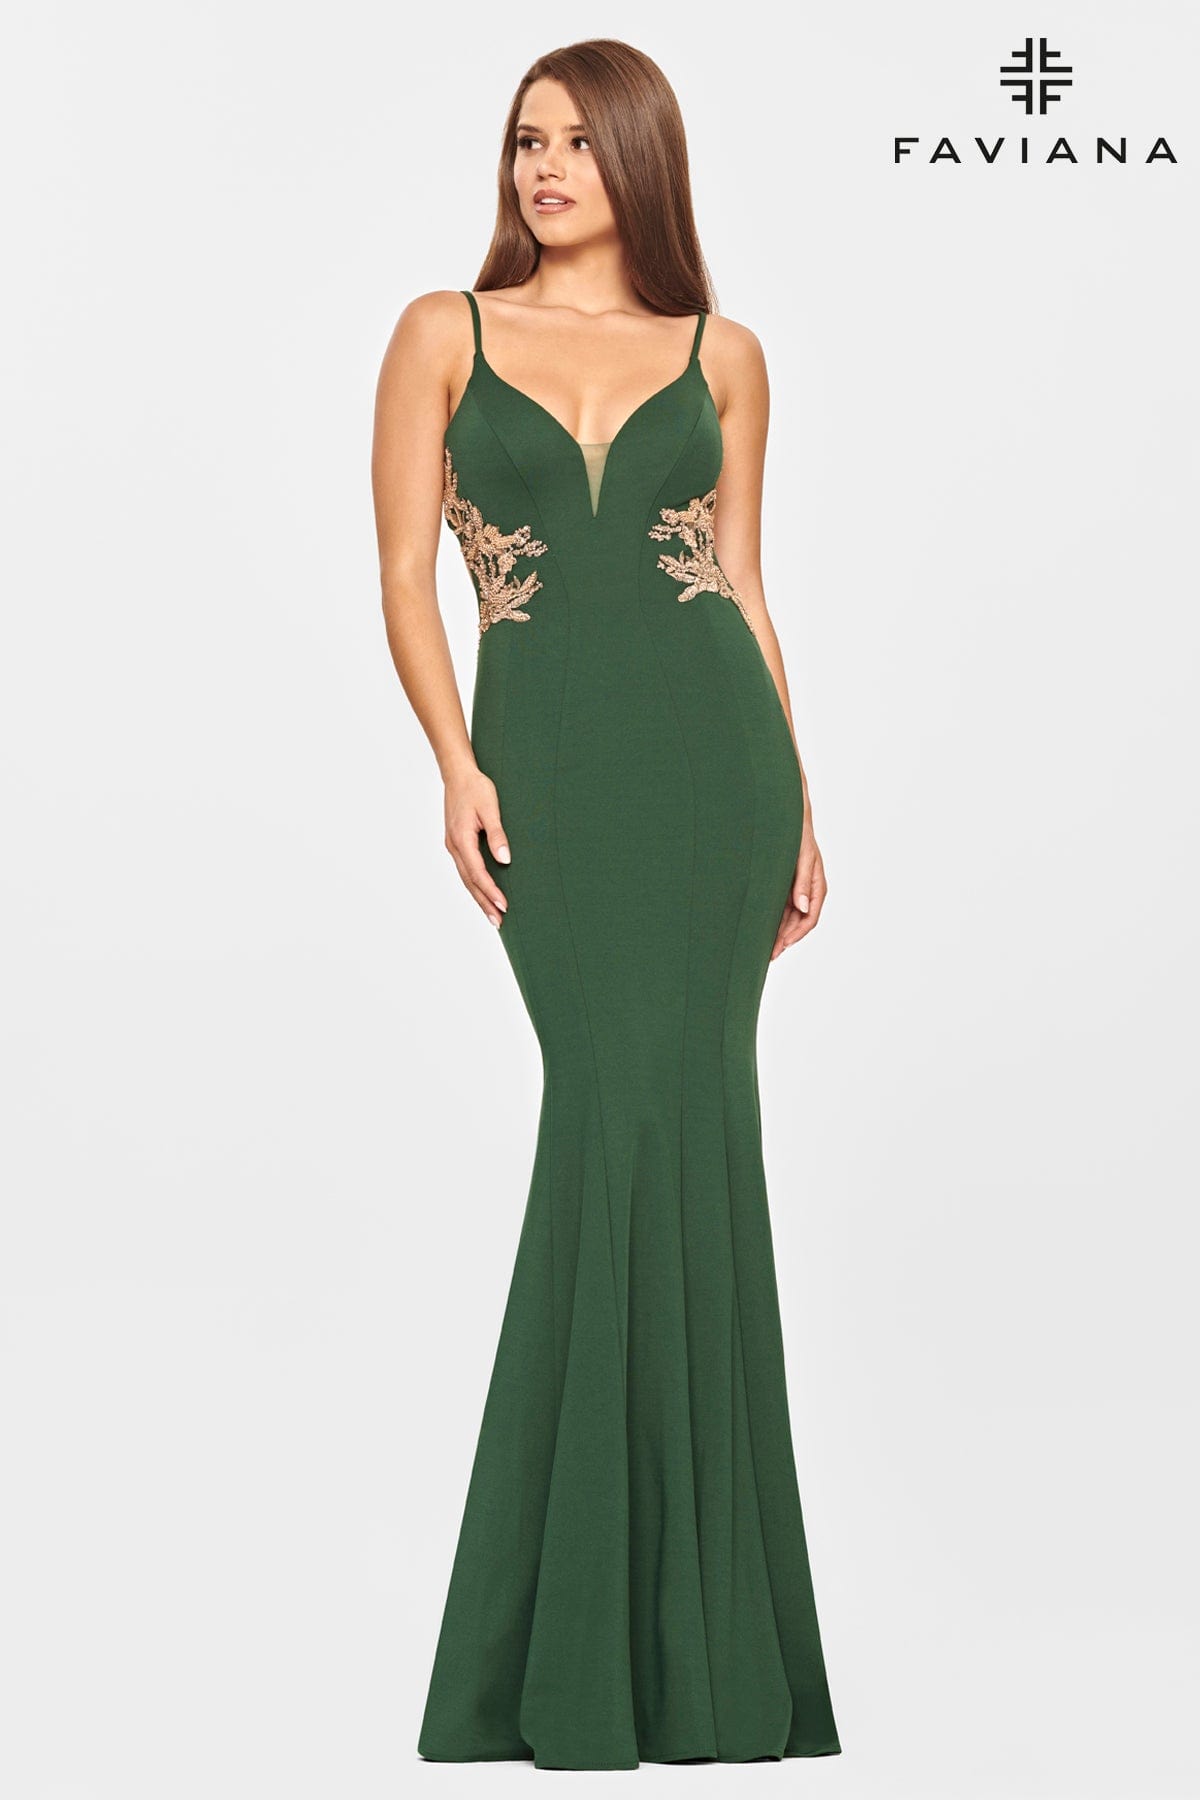 Jersey Long Dress With Beaded Lace Applique And Open Back